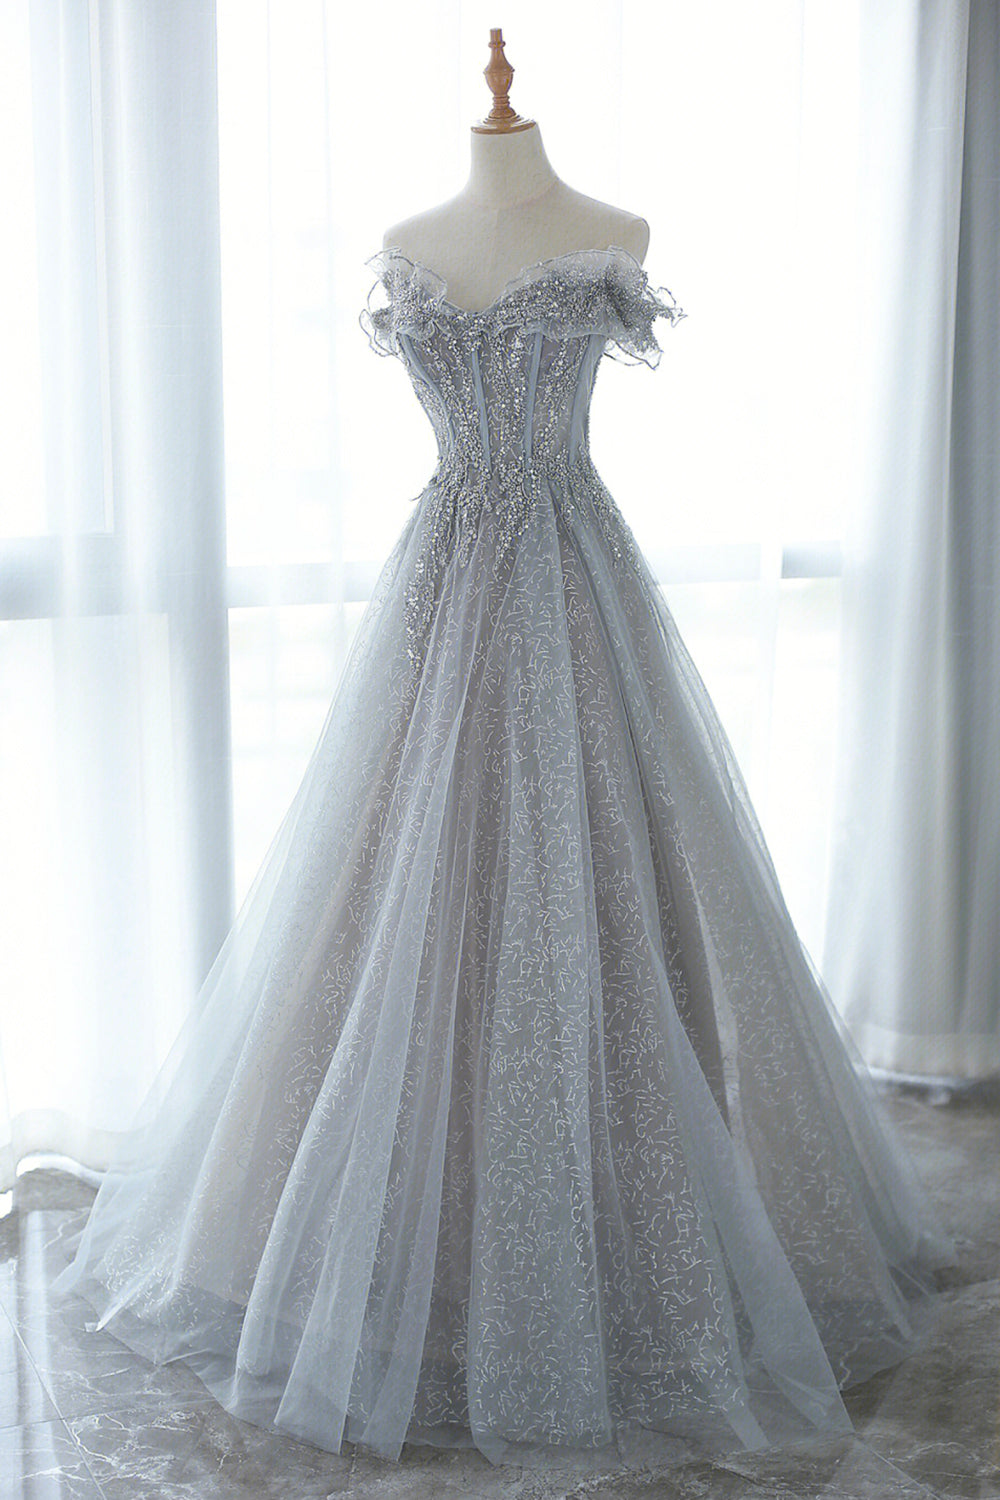 Prom Dress And Boots, Gray Tulle Lace Floor Length Evening Dress, Off the Shoulder Prom Dress